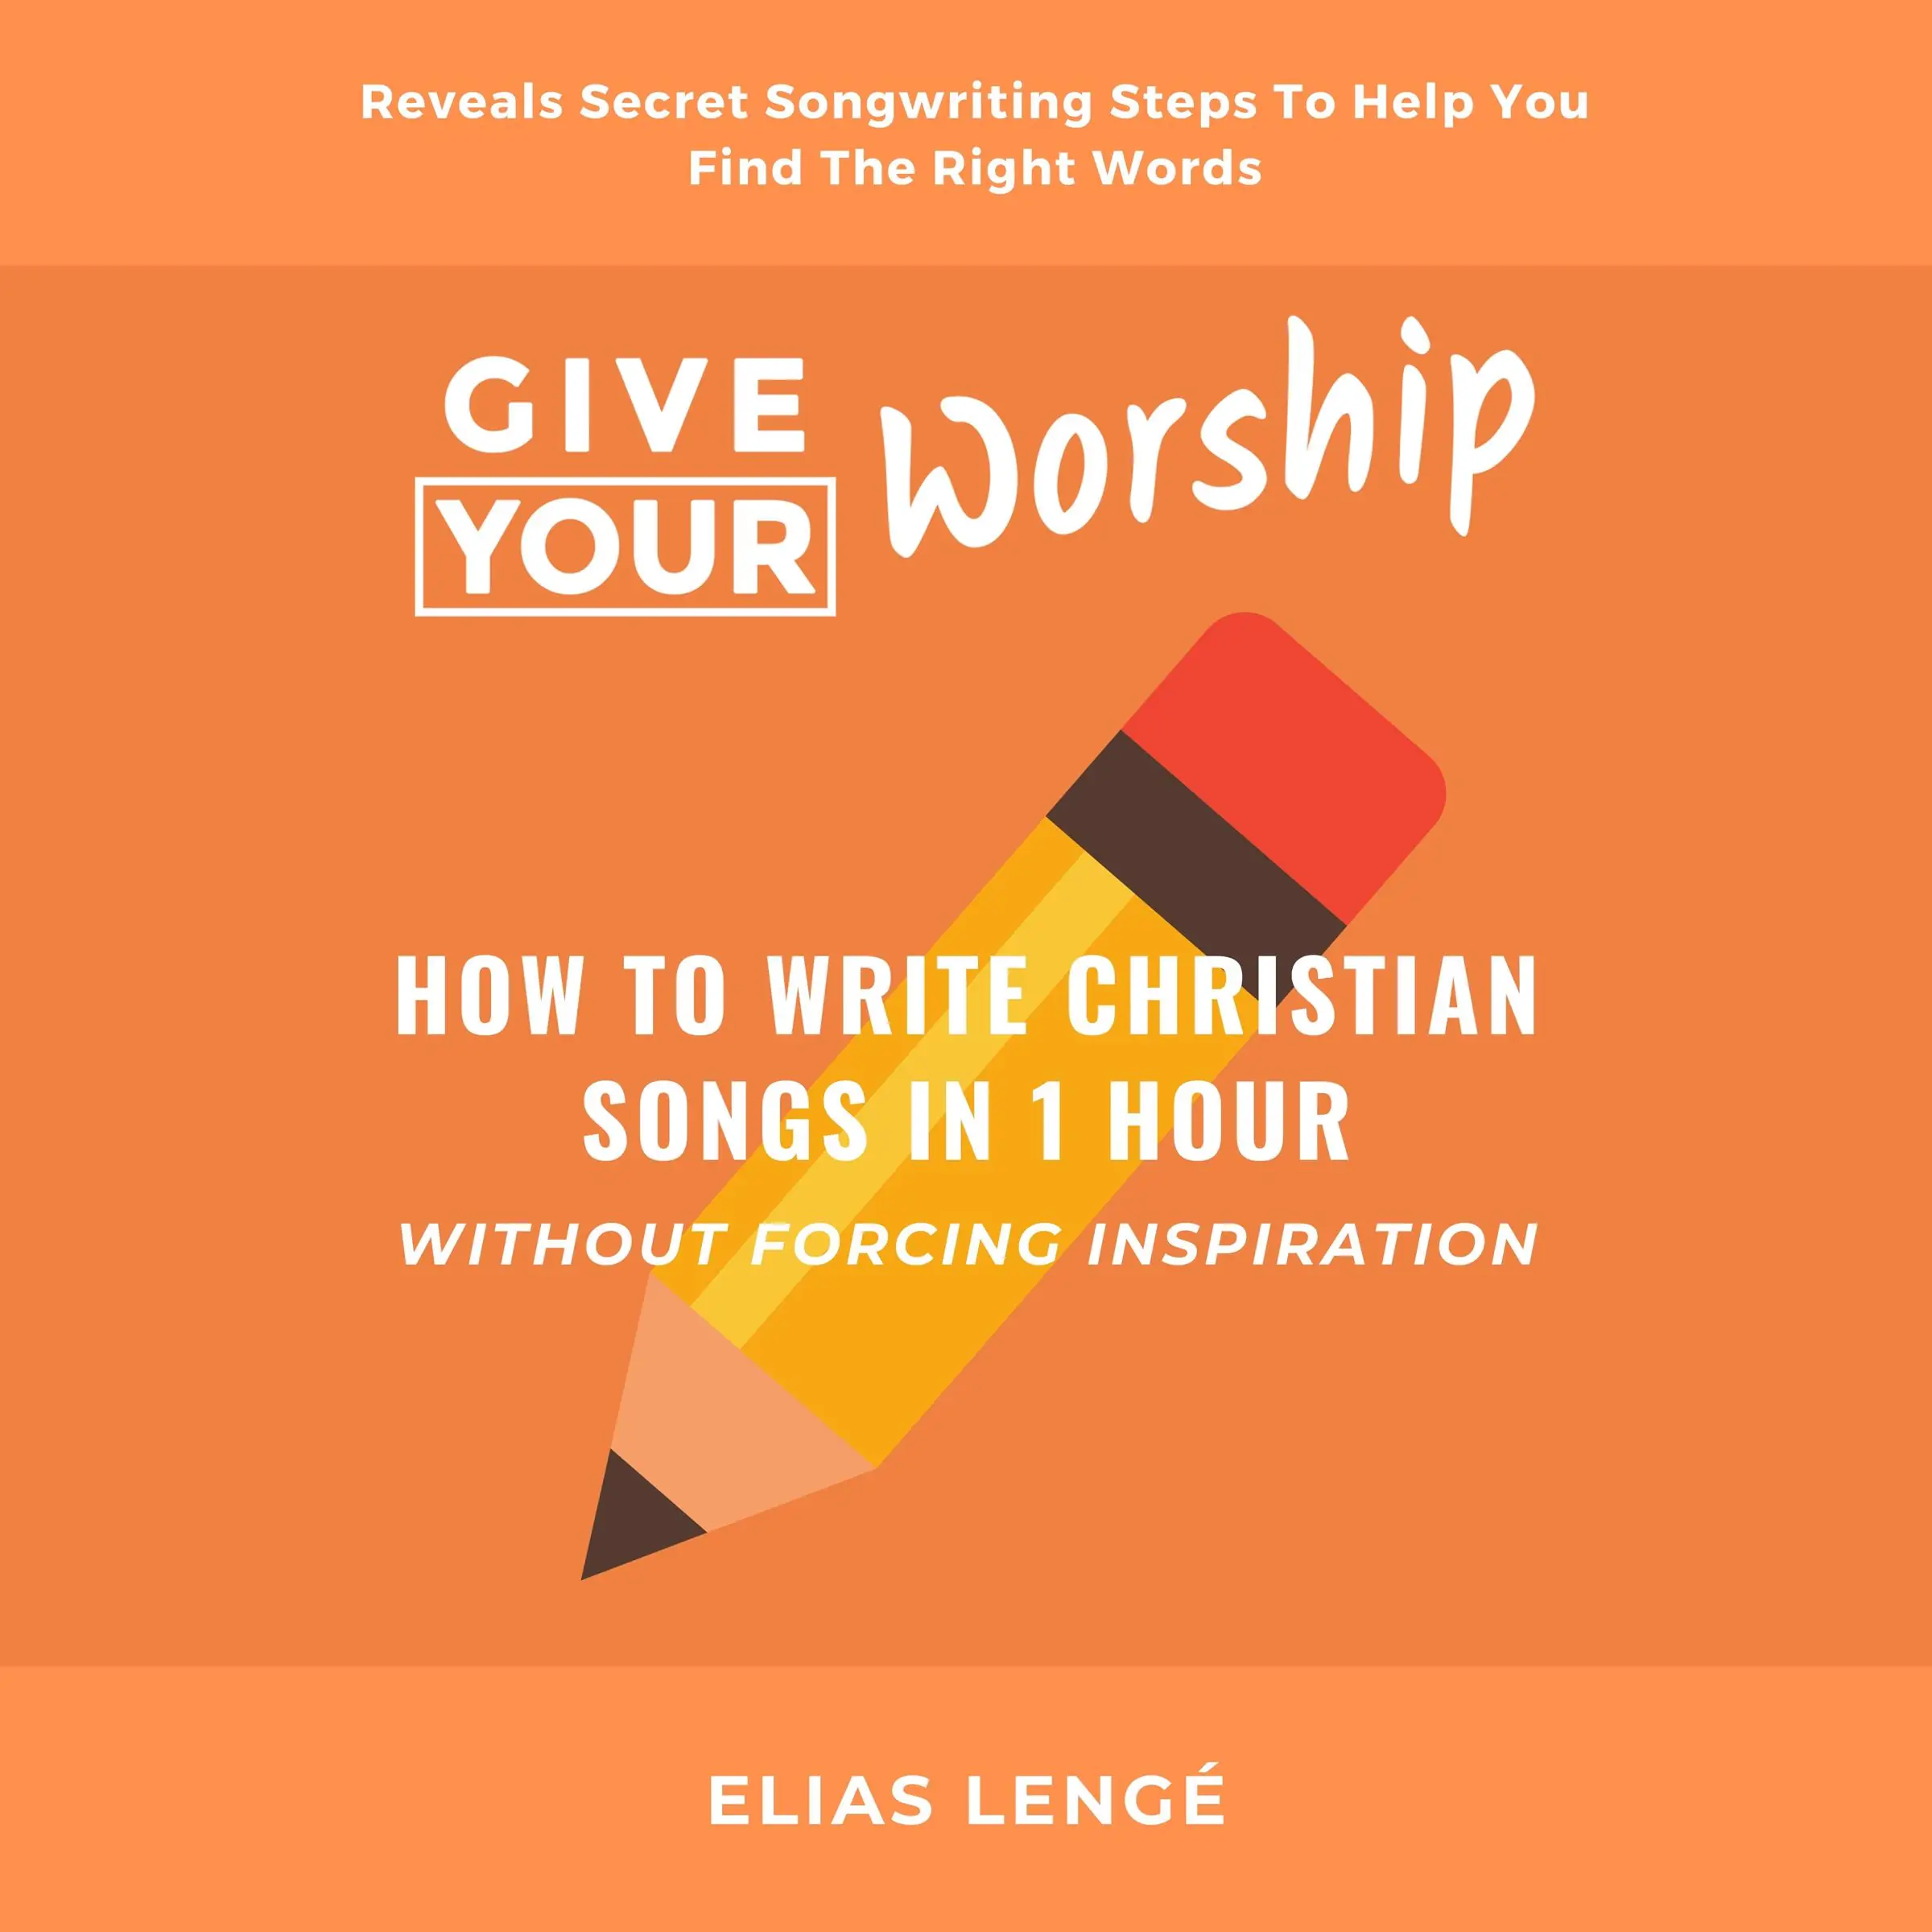 Give Your Worship Audiobook by Elias lenge